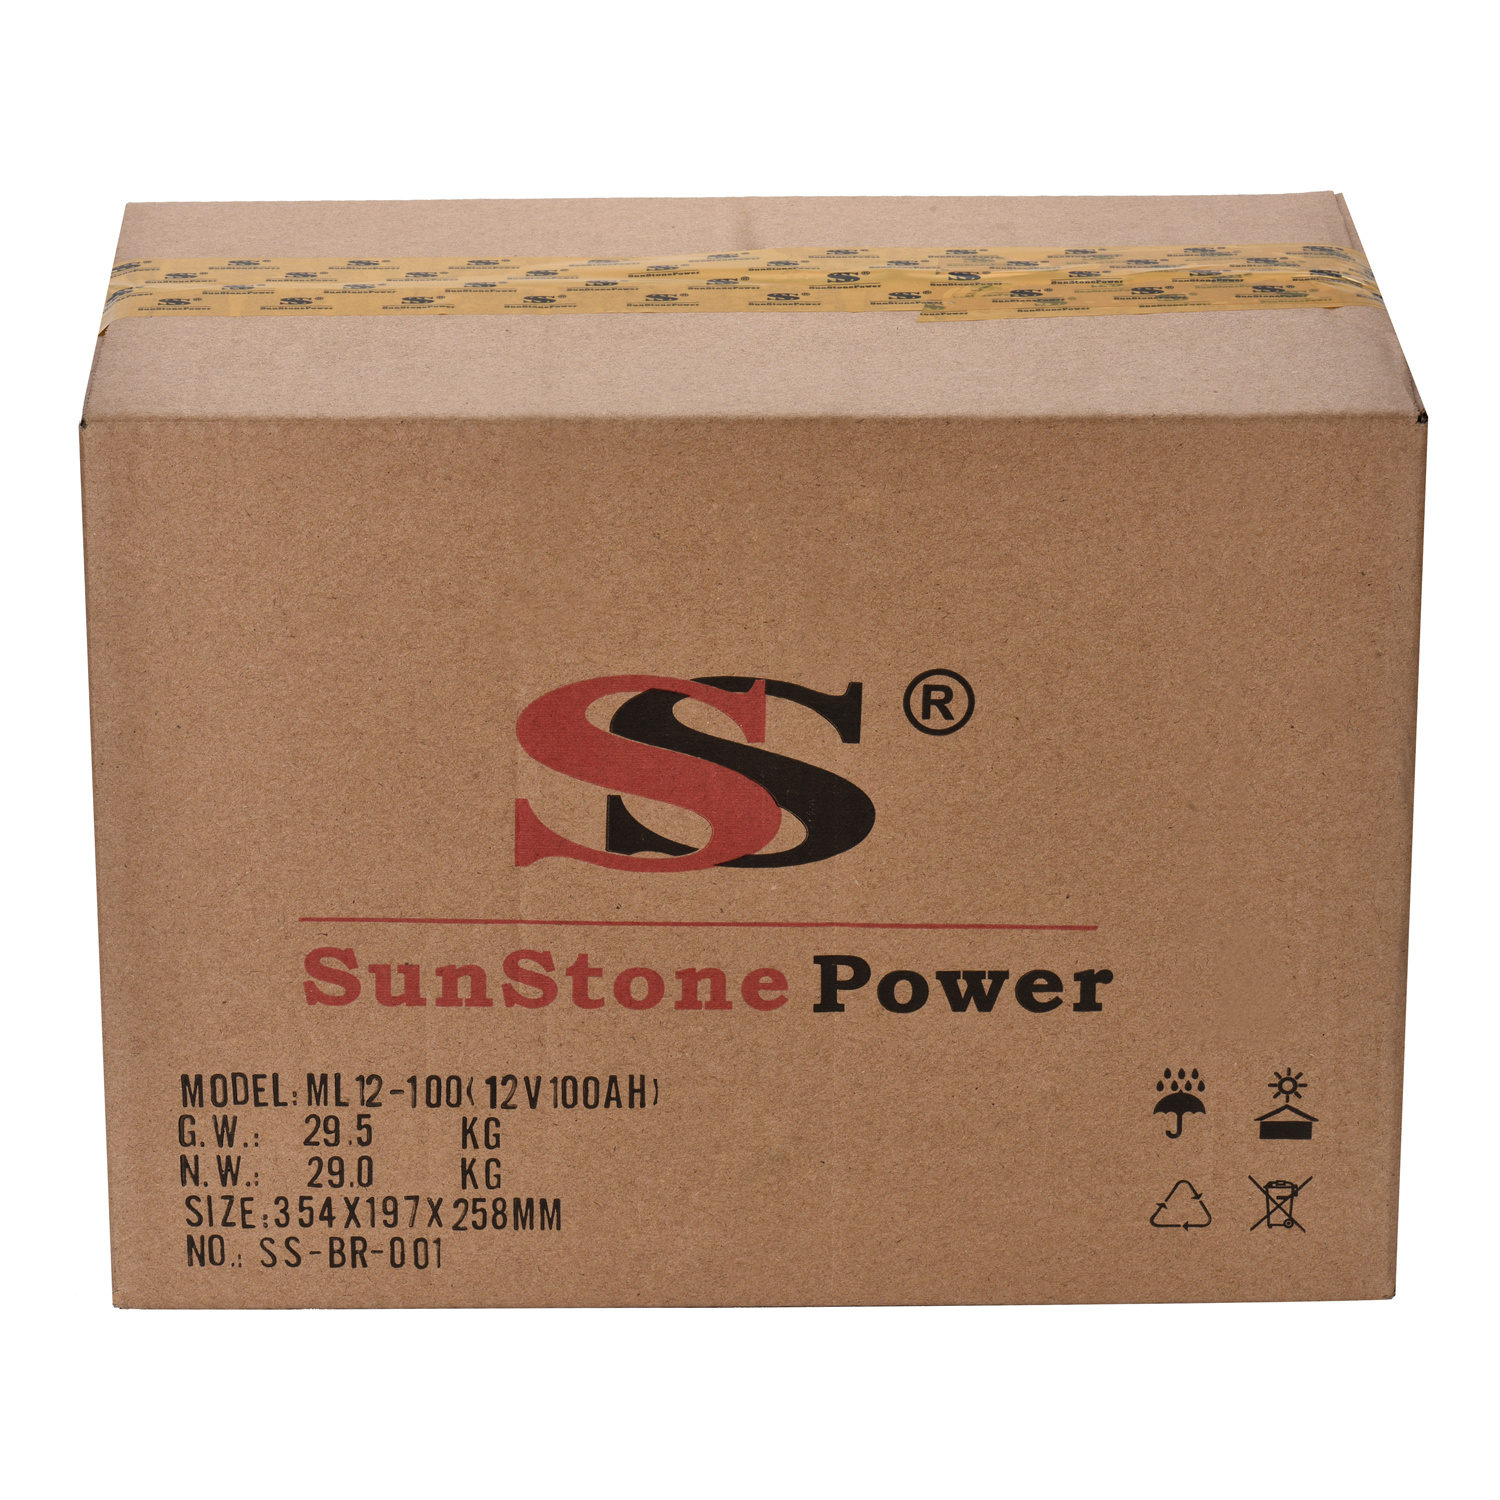 Sunstone Power 12V 24AH Energy Storage Battery Direct From Factory